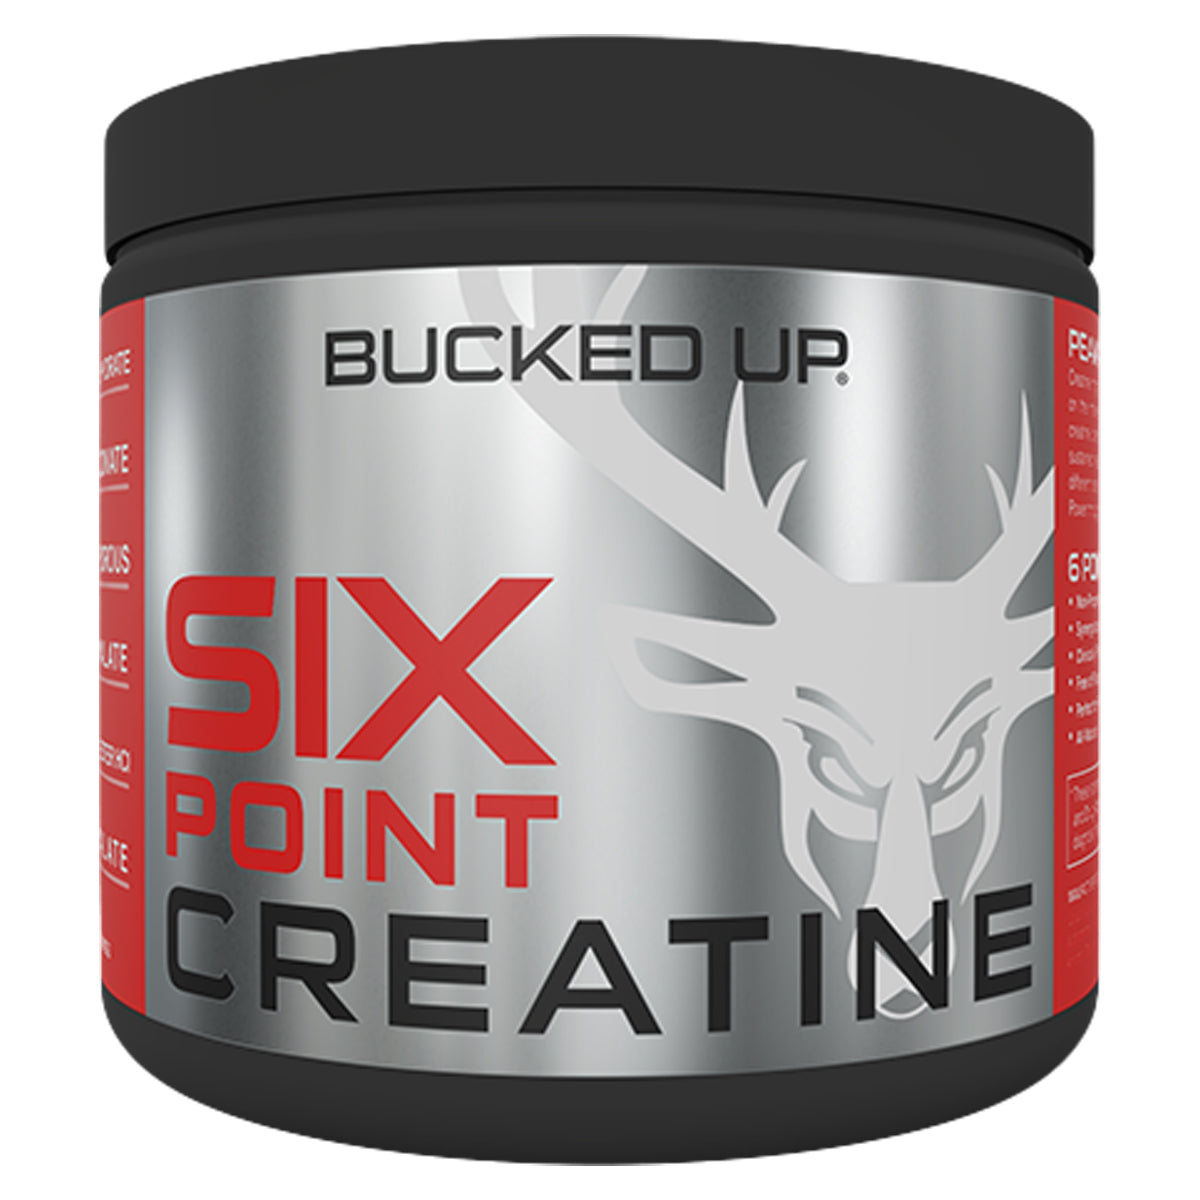 Bucked Up 6 Point Creatine in  by GOHUNT | Bucked Up - GOHUNT Shop